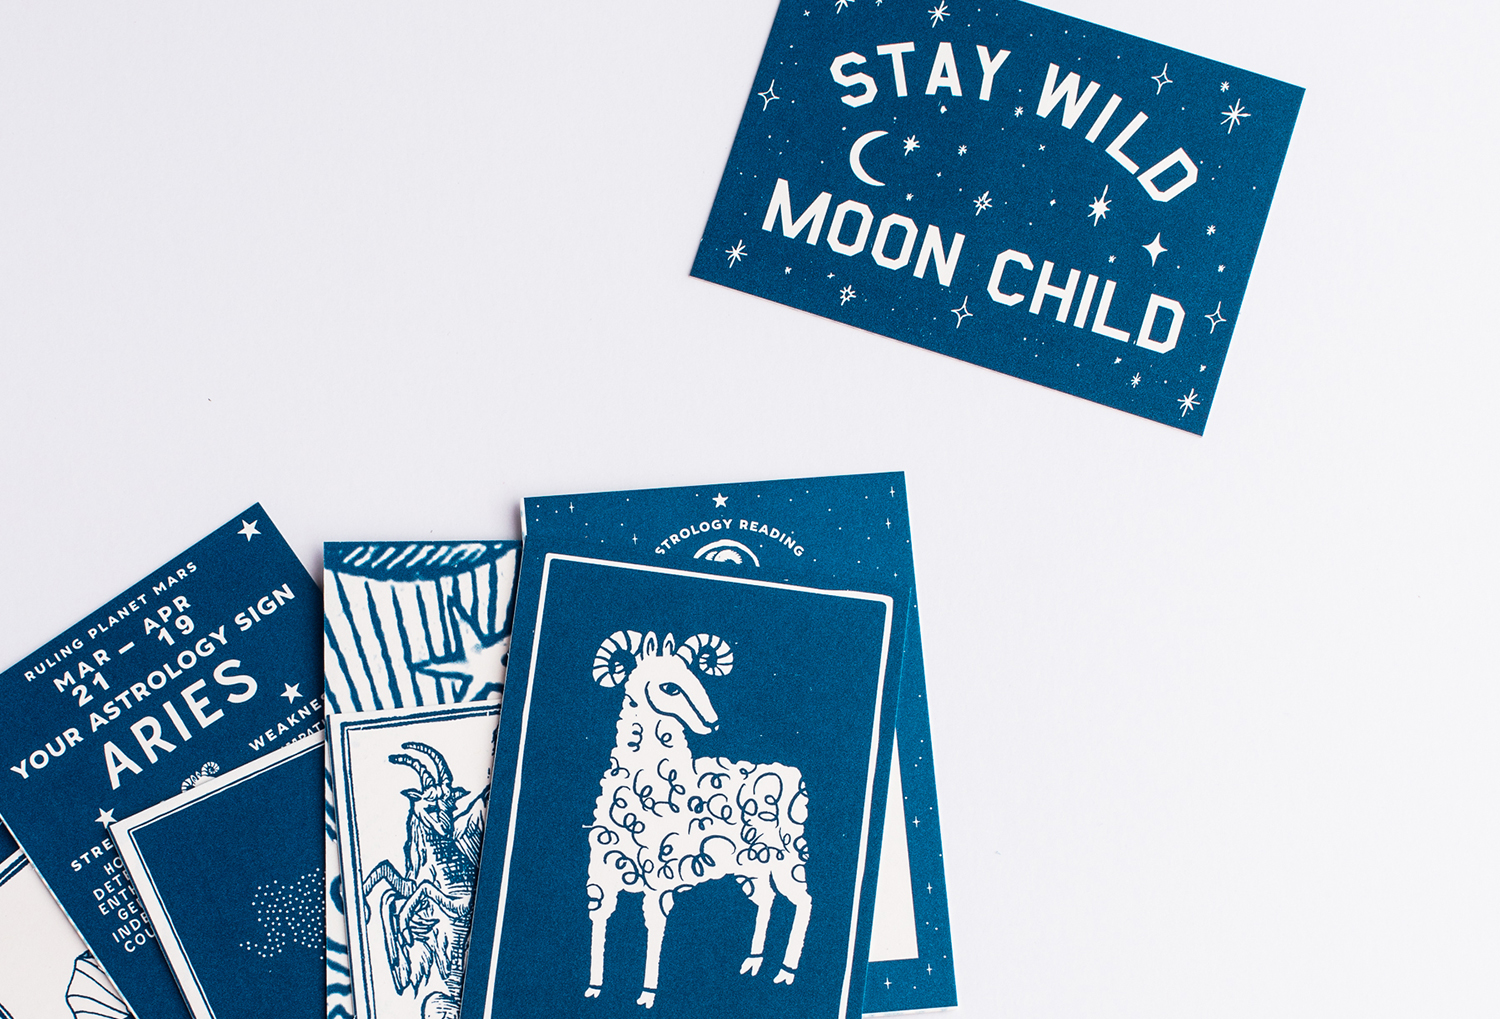 Astrology cards that show an Aries sign and one that says "Stay Wild Moon Child"